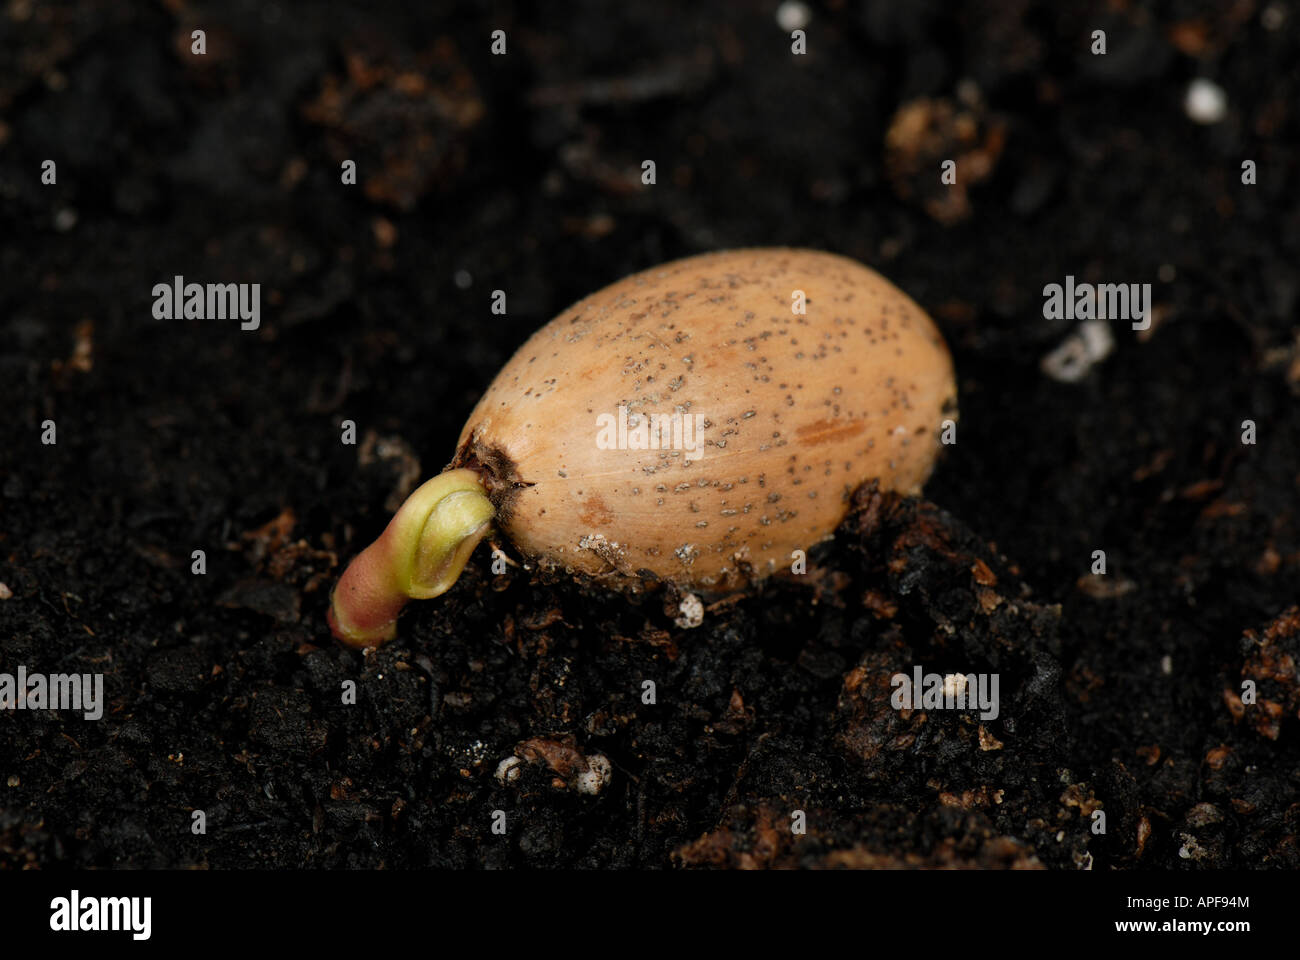 An oak Quercus robur acorn lying on the soil germinating aerial shoot beginning to develop Stock Photo